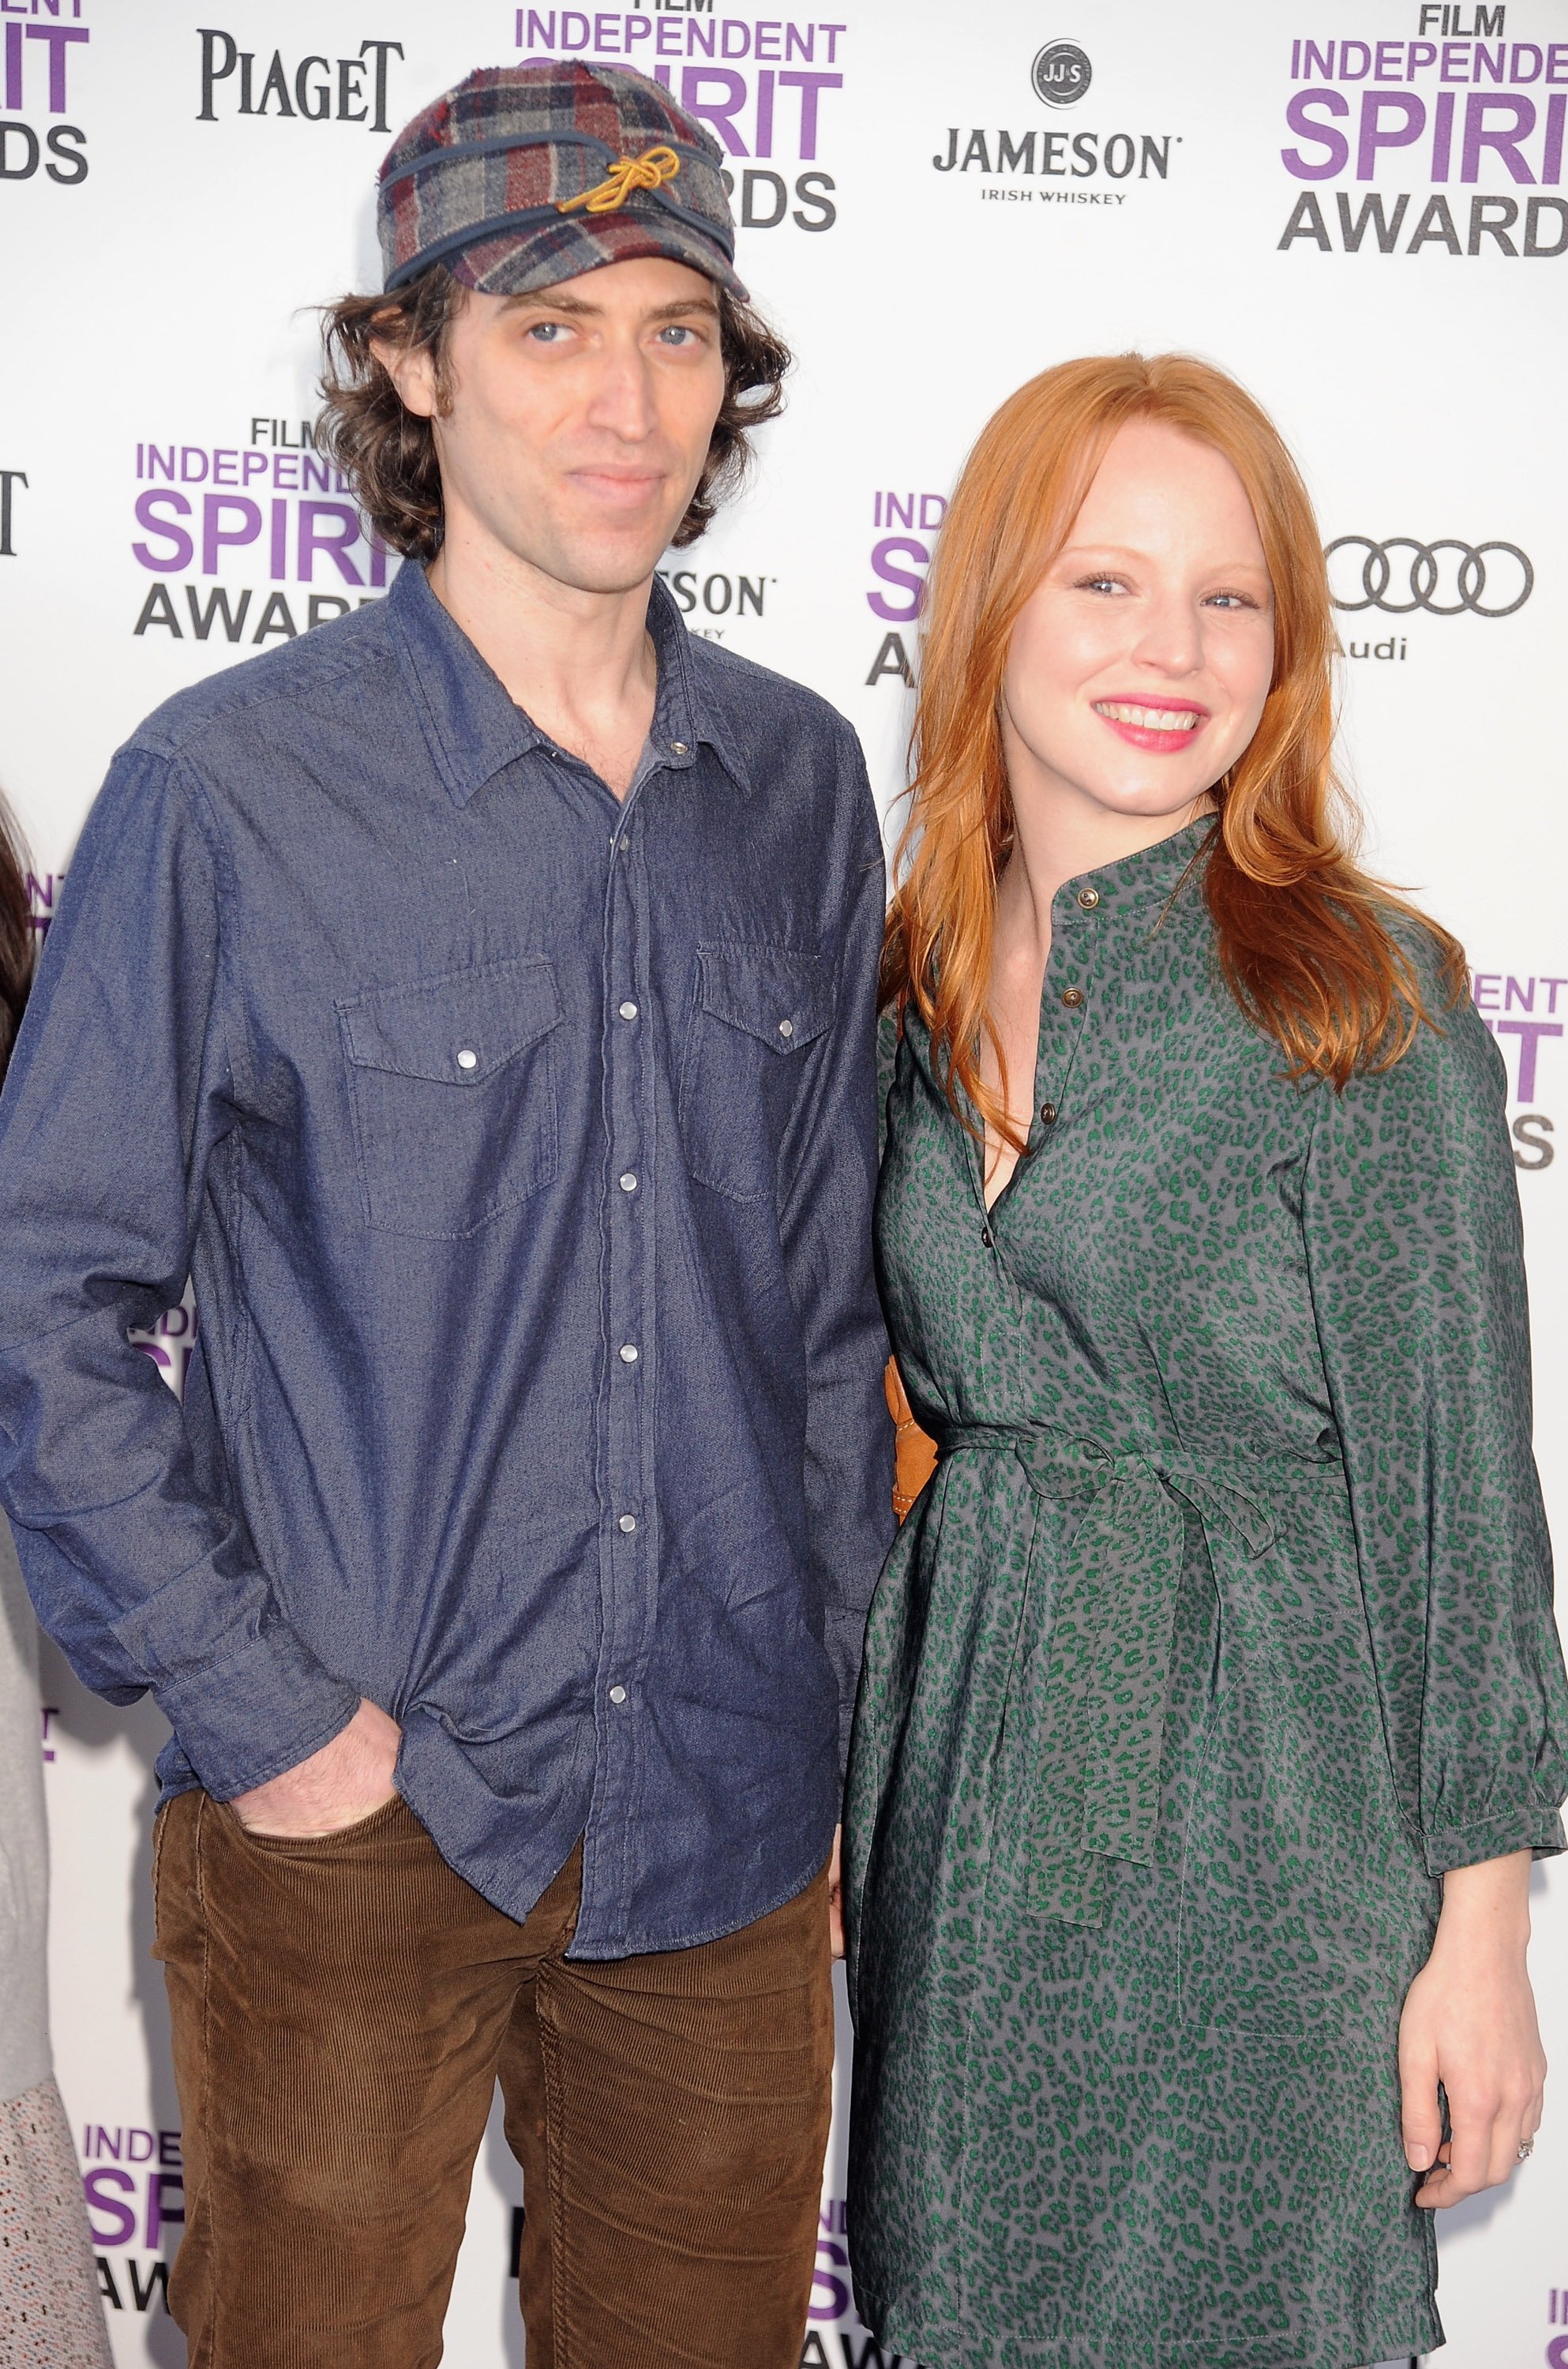 Actress Lauren Ambrose and her husband Sam Handel at the Santa Monica Pier in Santa Monica, California, on February 25, 2012. | Source: Getty Images